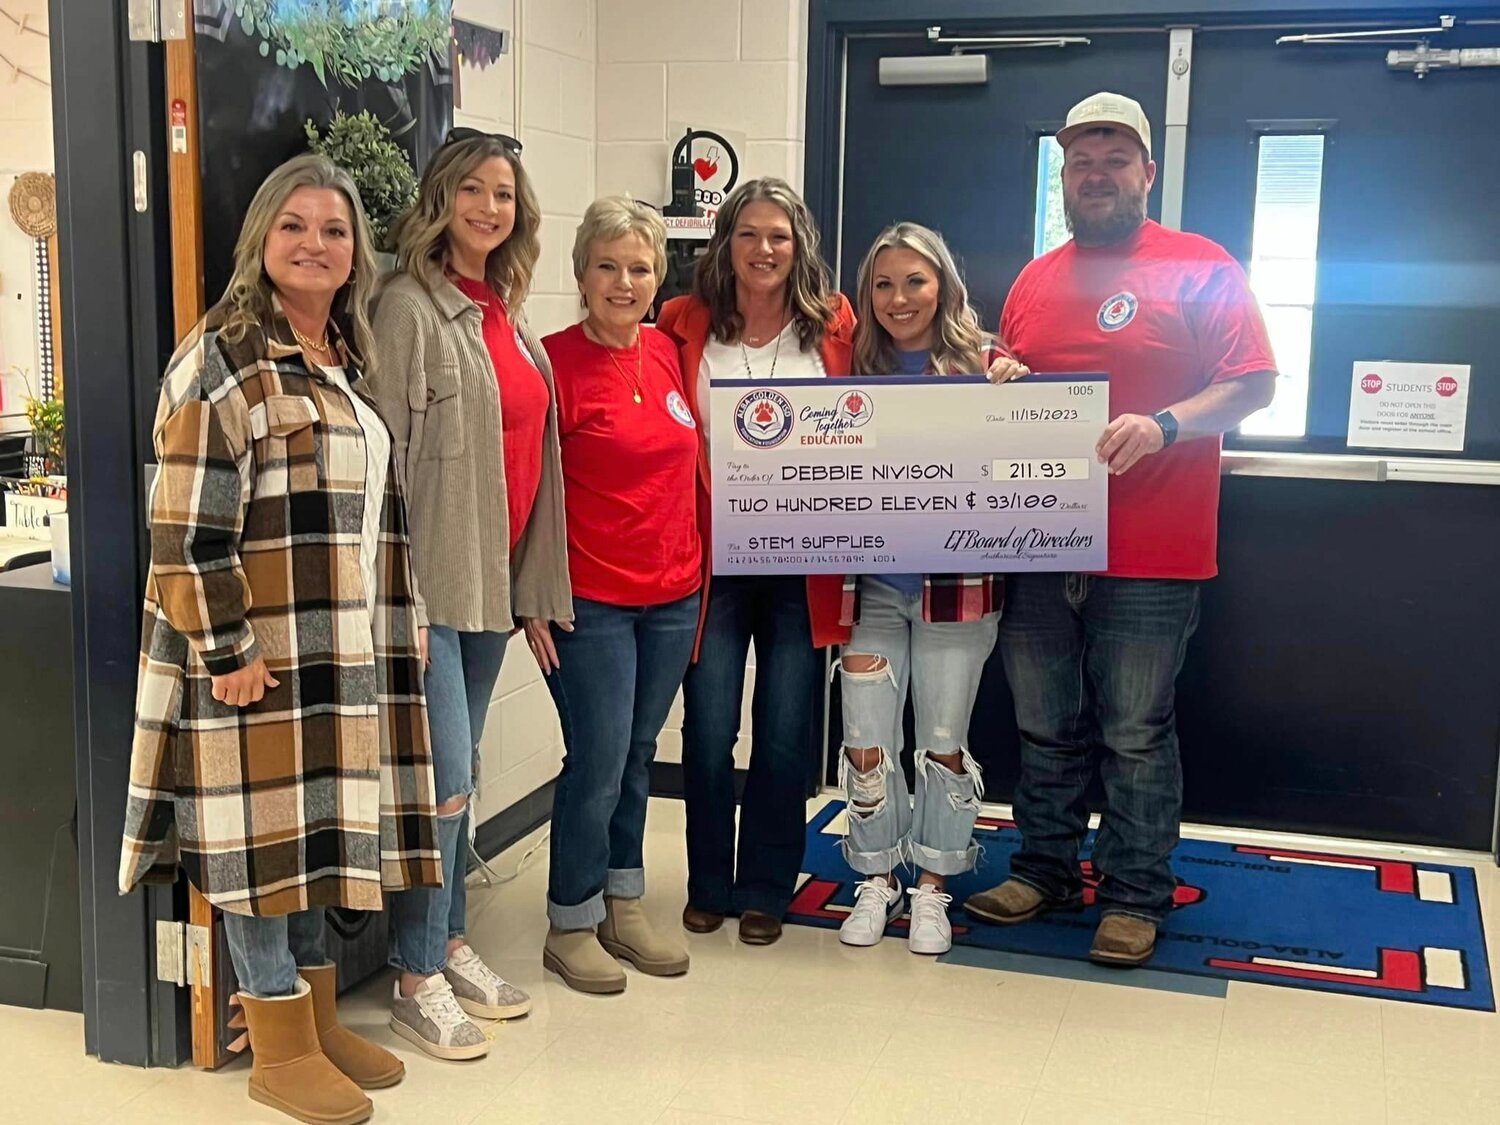 The Alba-Golden Education Foundation held its first grant awards presentation last week, passing out funds for special requests by classroom teachers.